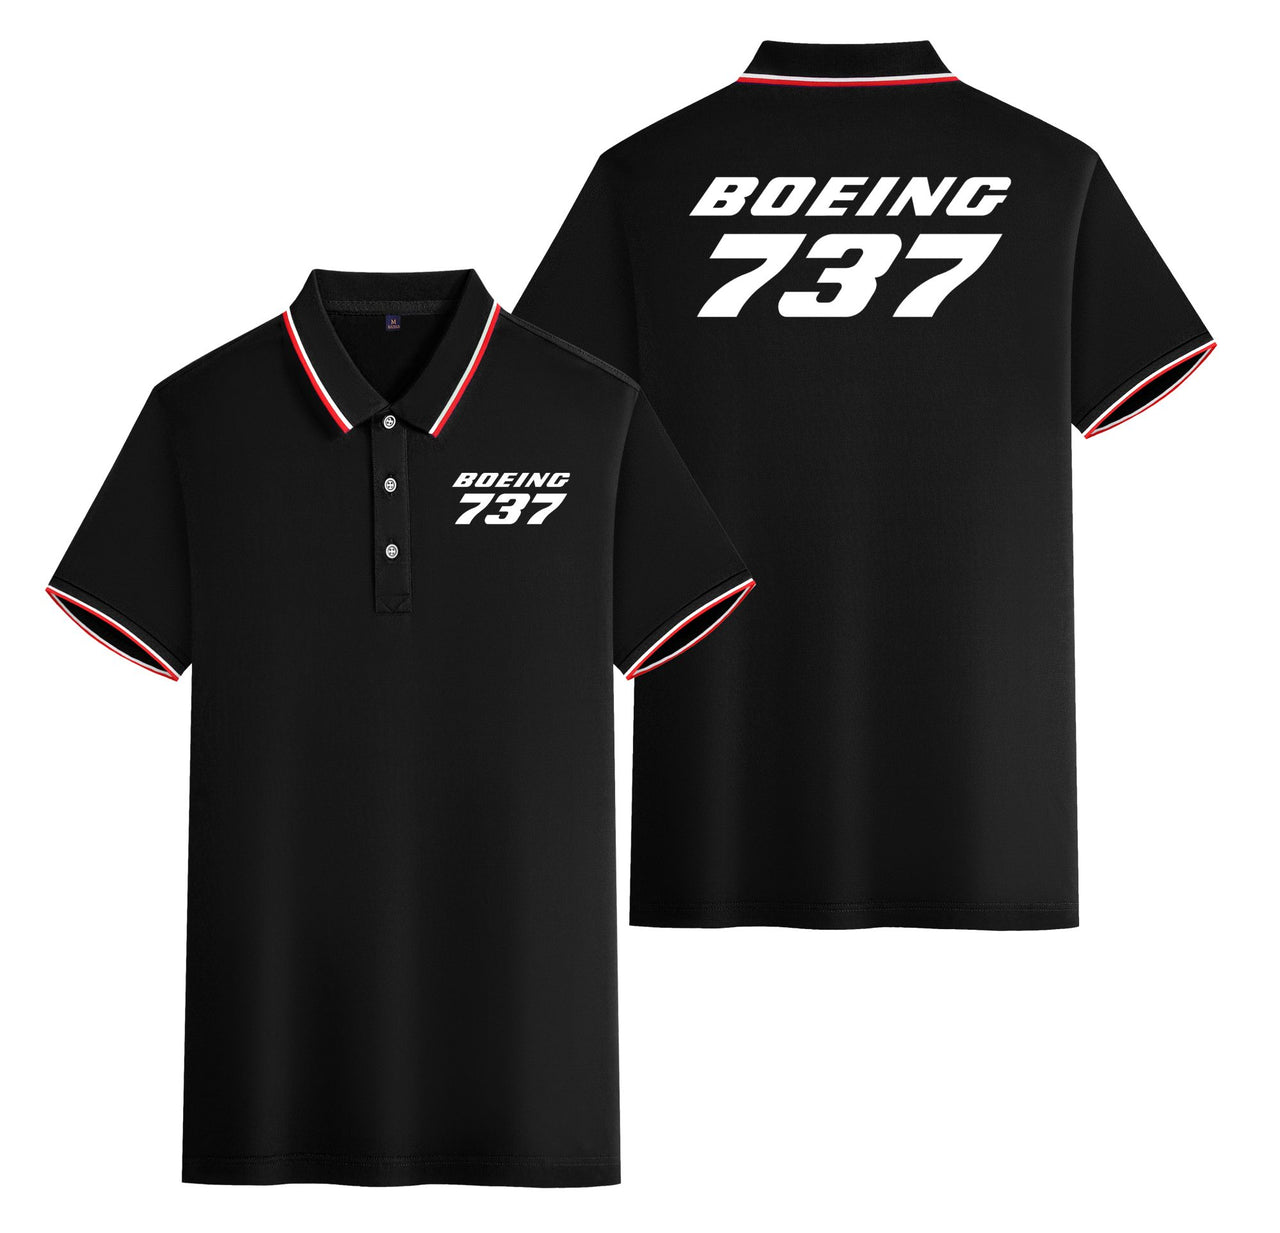 Boeing 737 & Text Designed Stylish Polo T-Shirts (Double-Side)